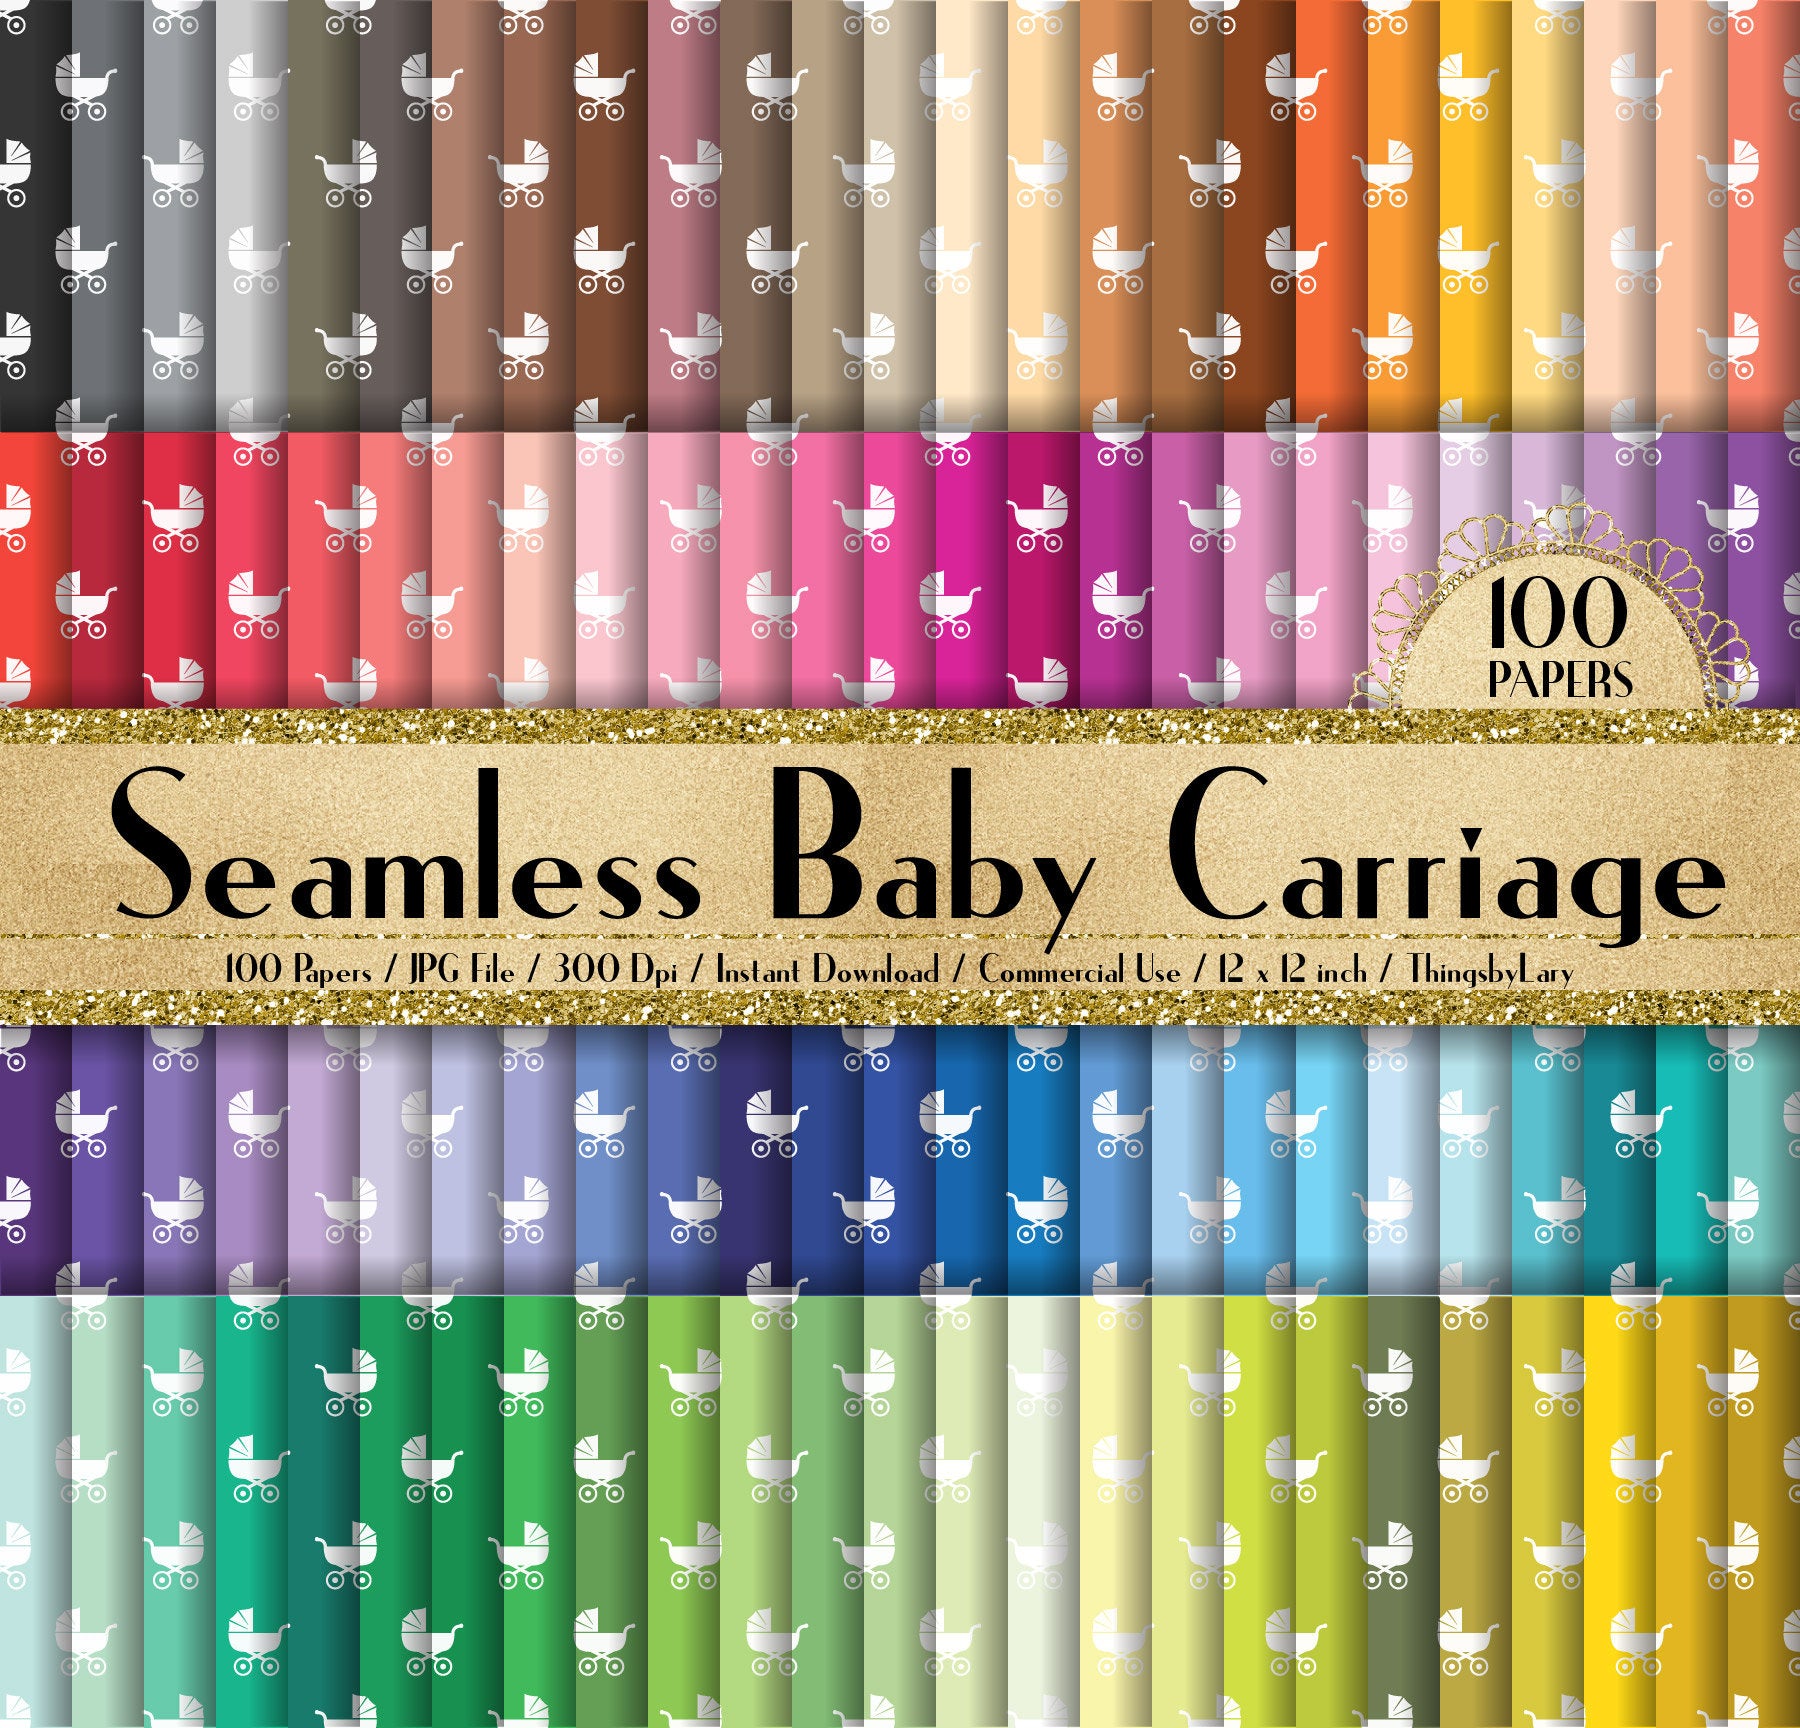 100 Seamless Baby Carriage Papers 12 inch 300 Dpi Instant Download Commercial Use, Planner Paper, Scrapbooking Baby Shower Kit, Seamless